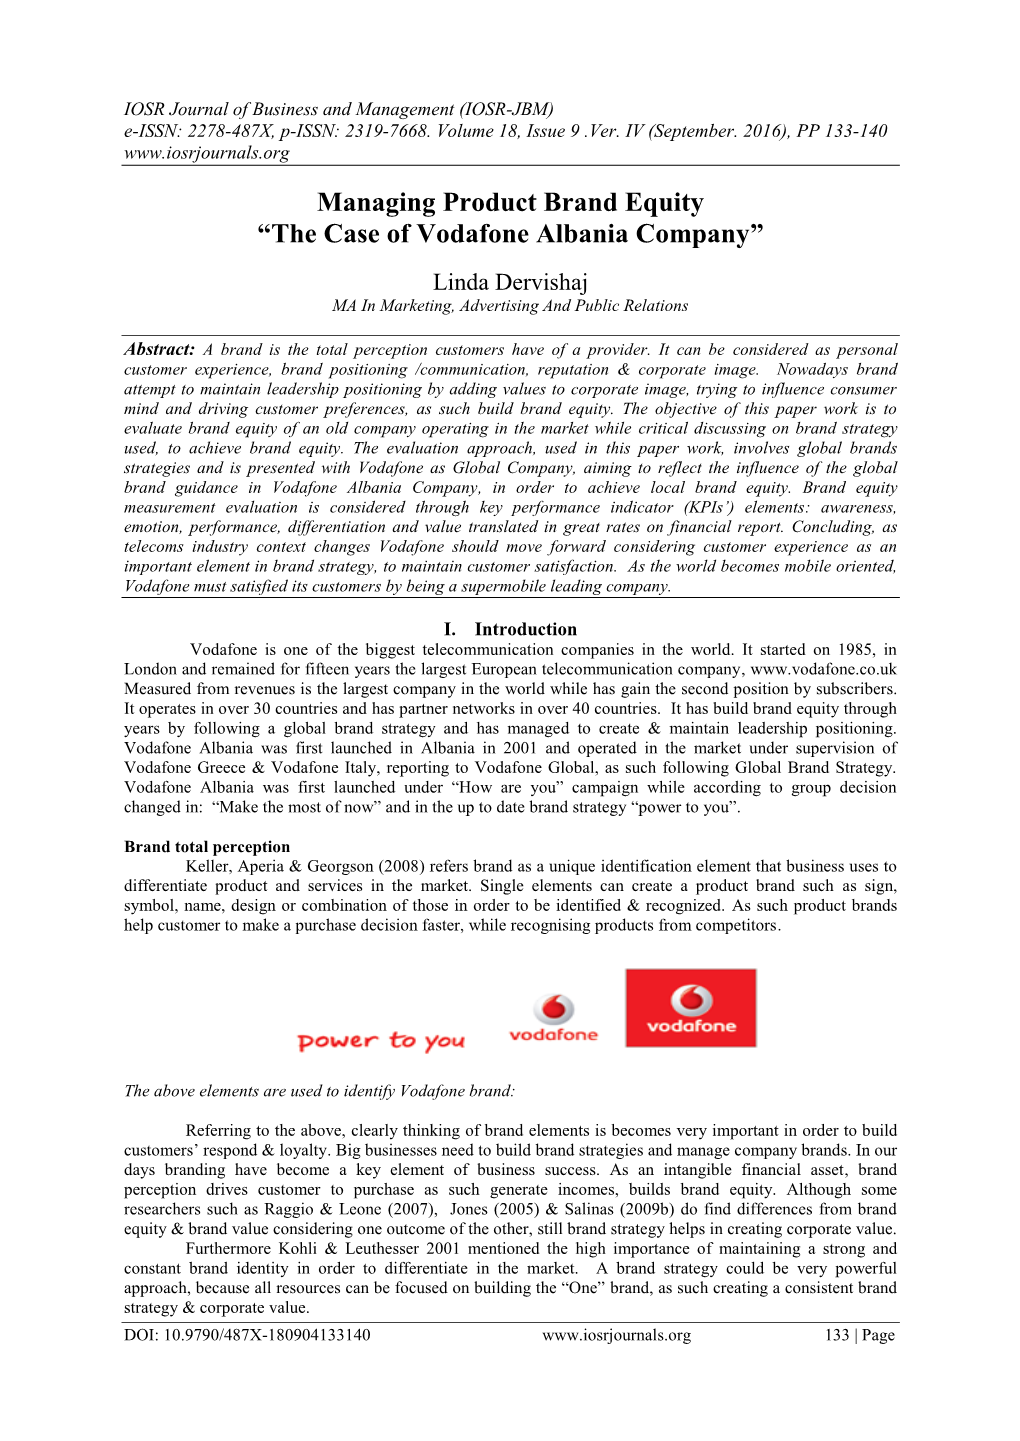 Managing Product Brand Equity “The Case of Vodafone Albania Company”